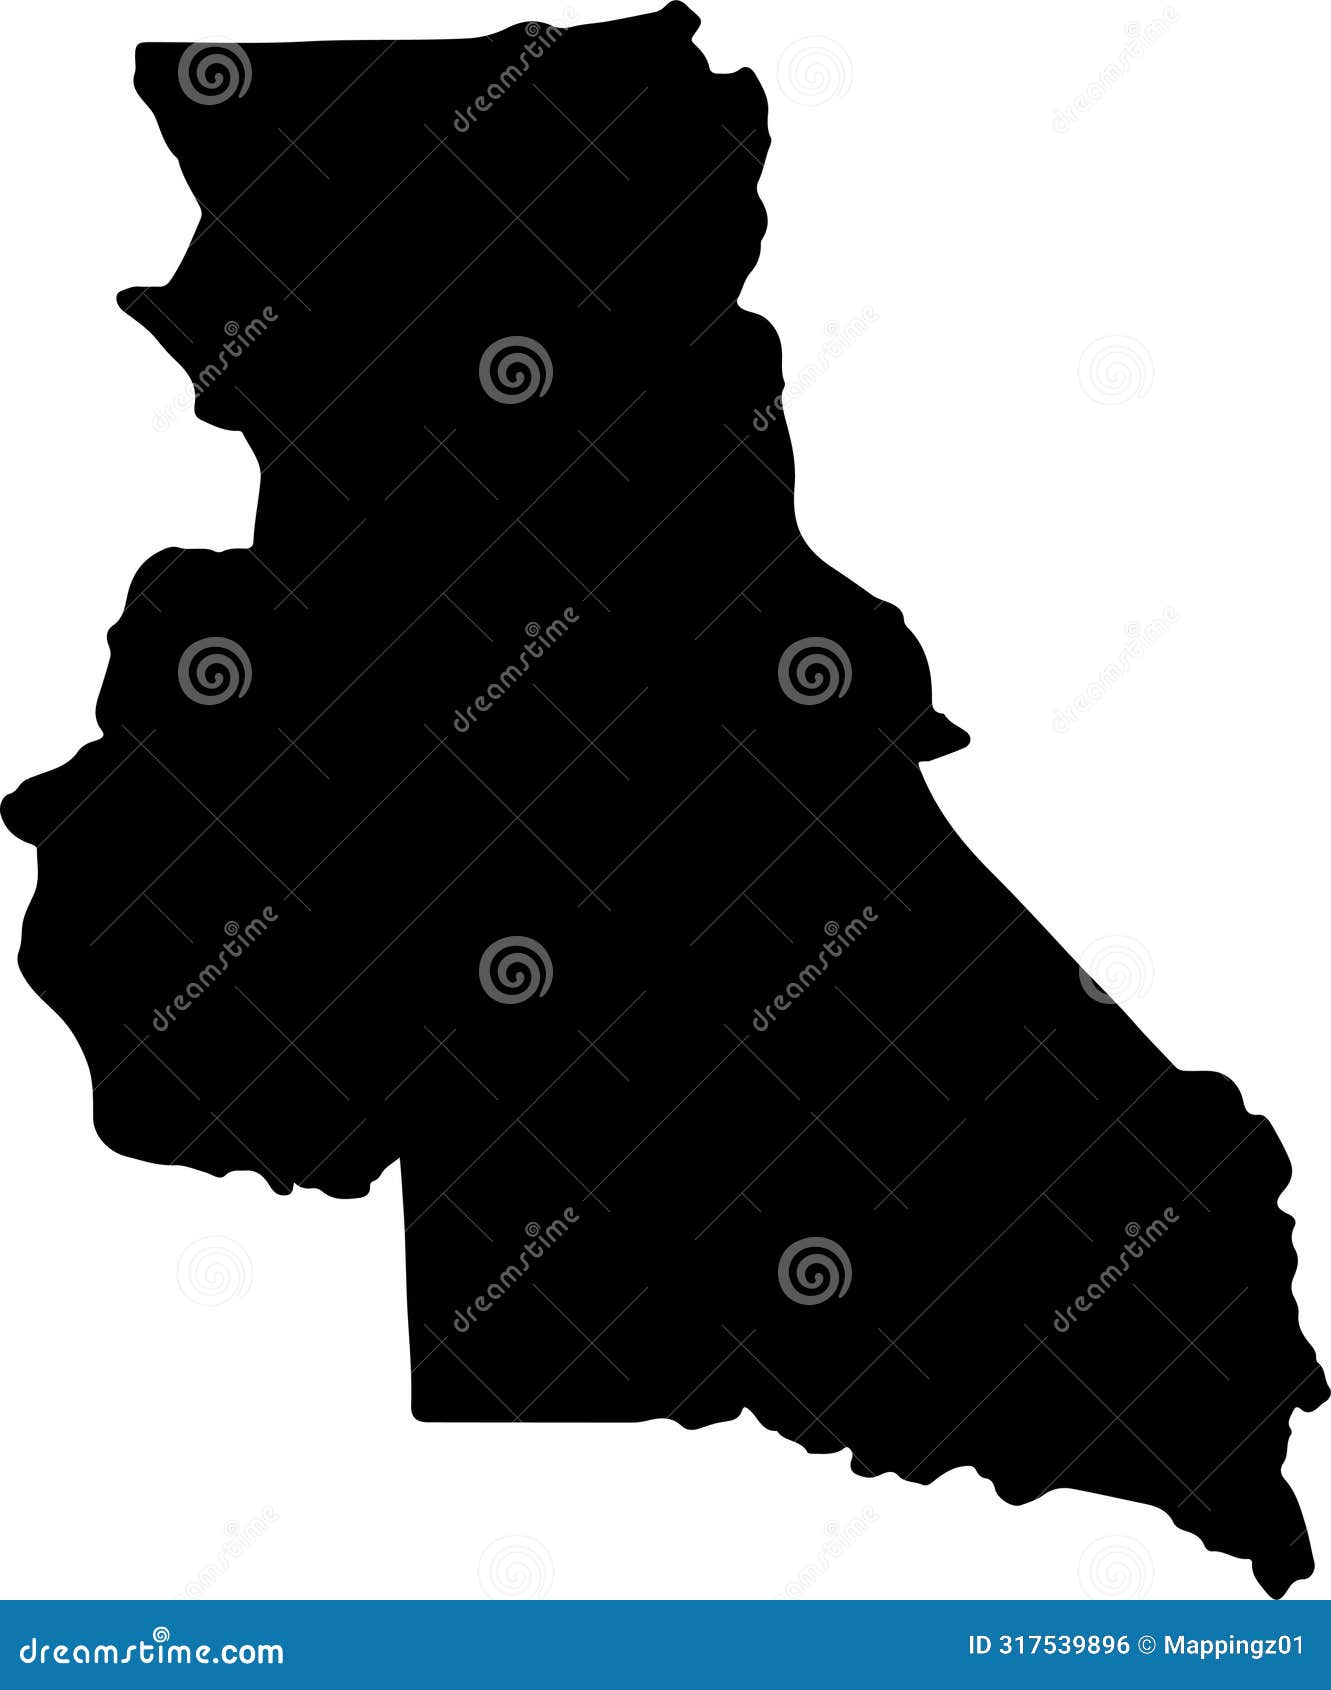 est cameroon silhouette map with transparent background